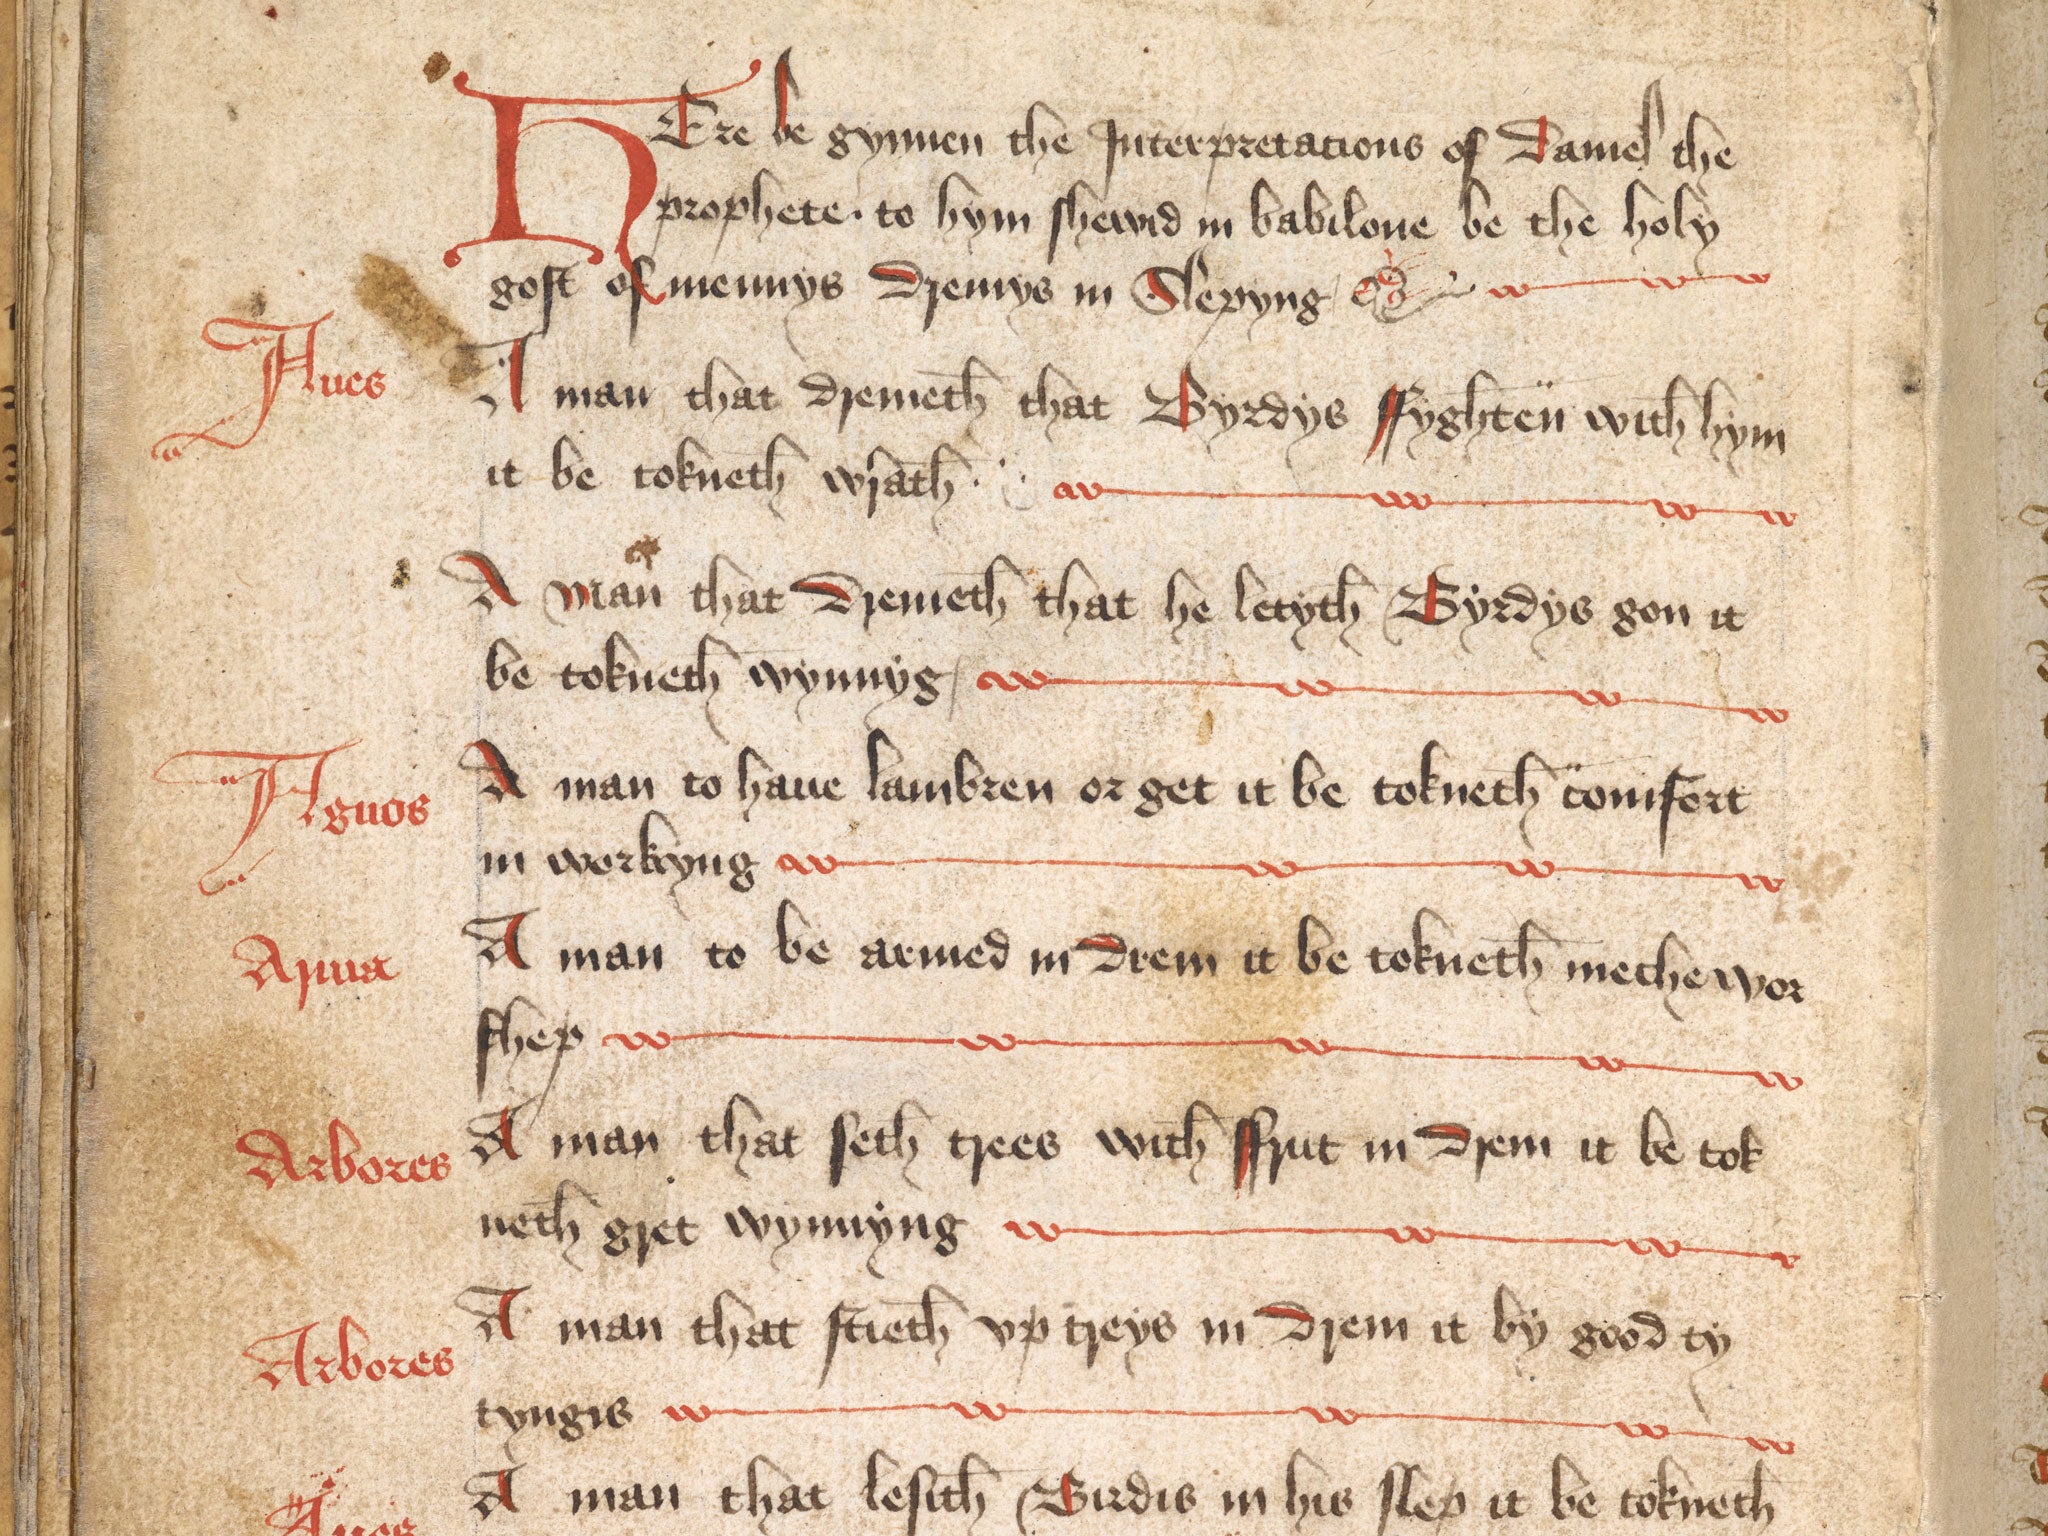 Medieval dreambook: Somnia Danielis, available on the British Library's Discovering Literature